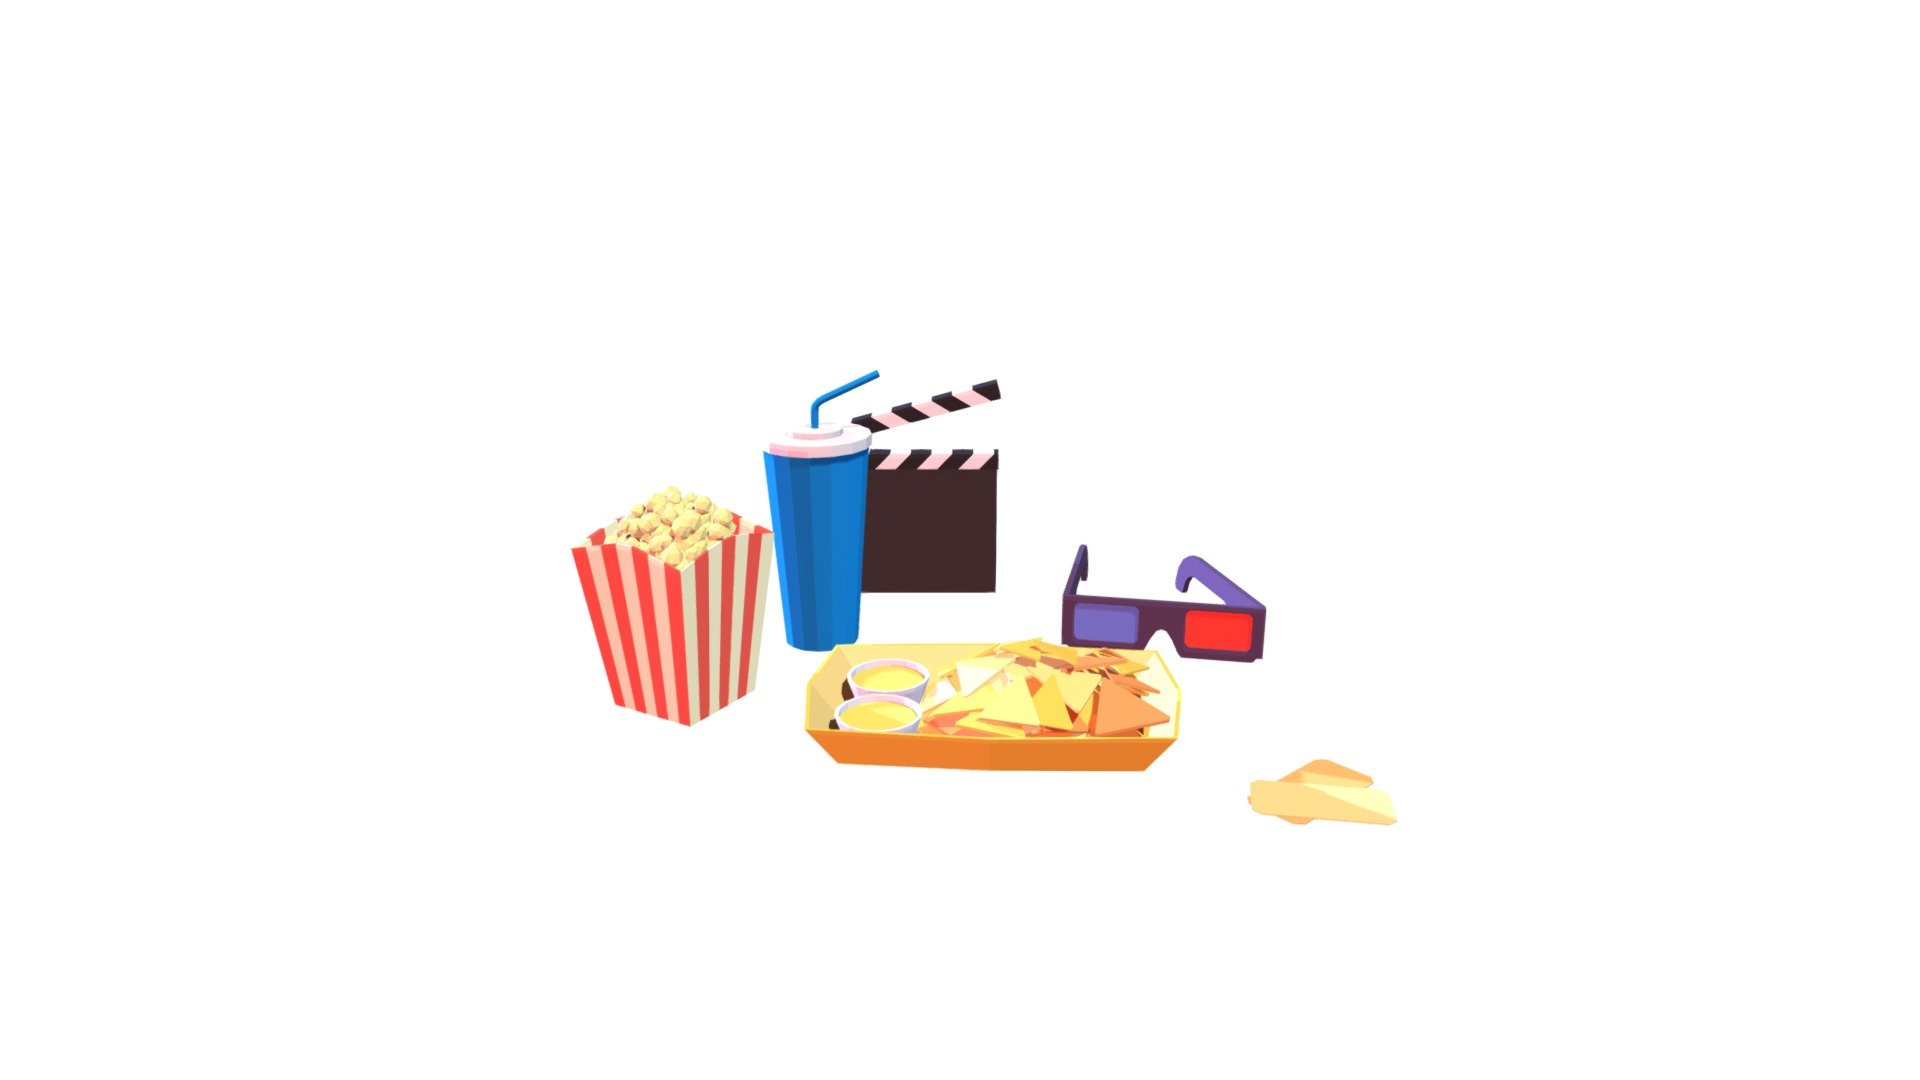 A couple of items that you might need at a movie theater.

A few rendered images here:
https://dribbble.com/sorincovor - Movie Essentials - 3D model by Sorin Covor (@blessthefall) 3d model